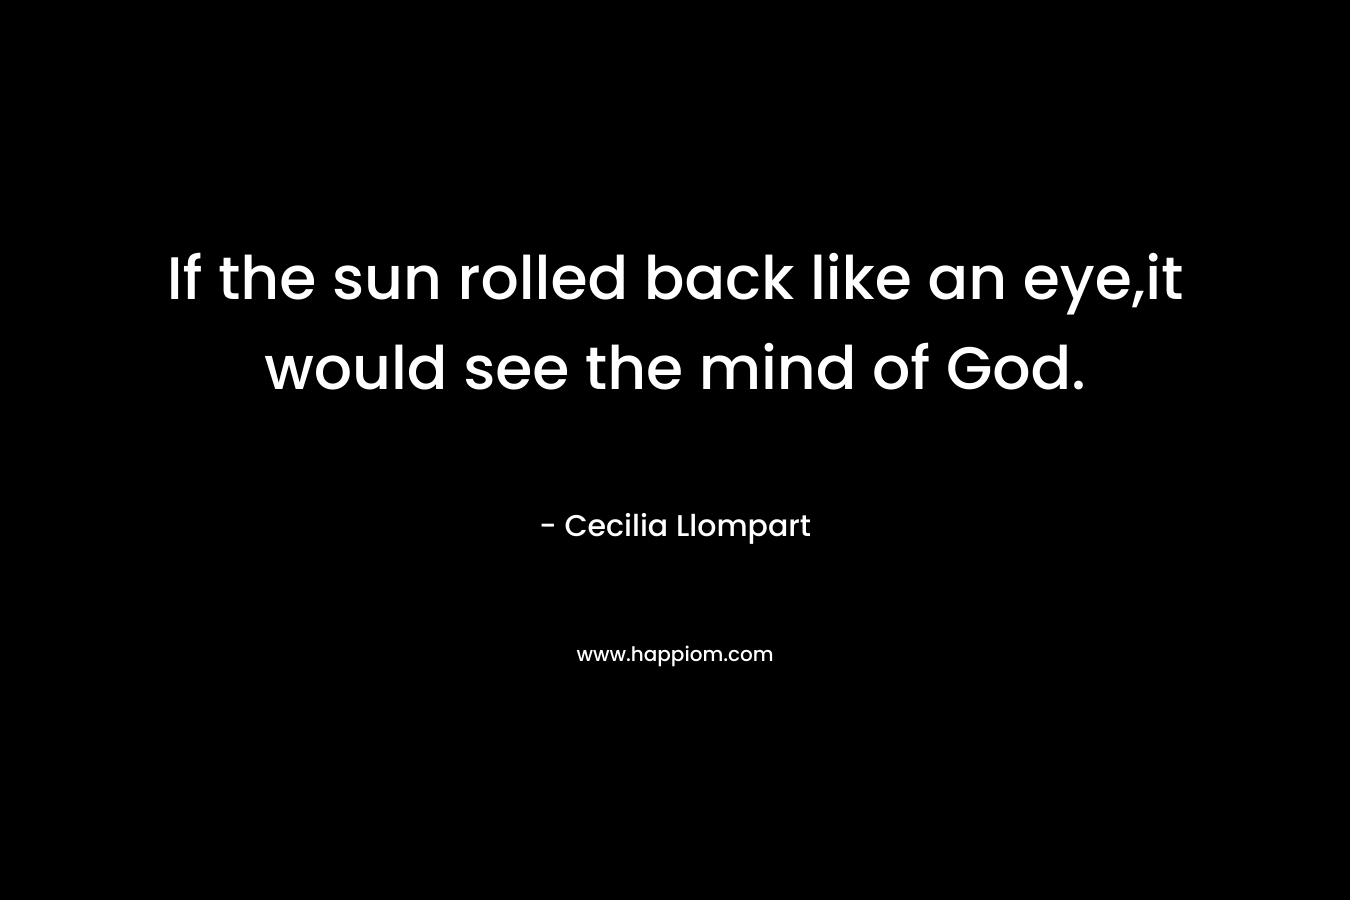 If the sun rolled back like an eye,it would see the mind of God.